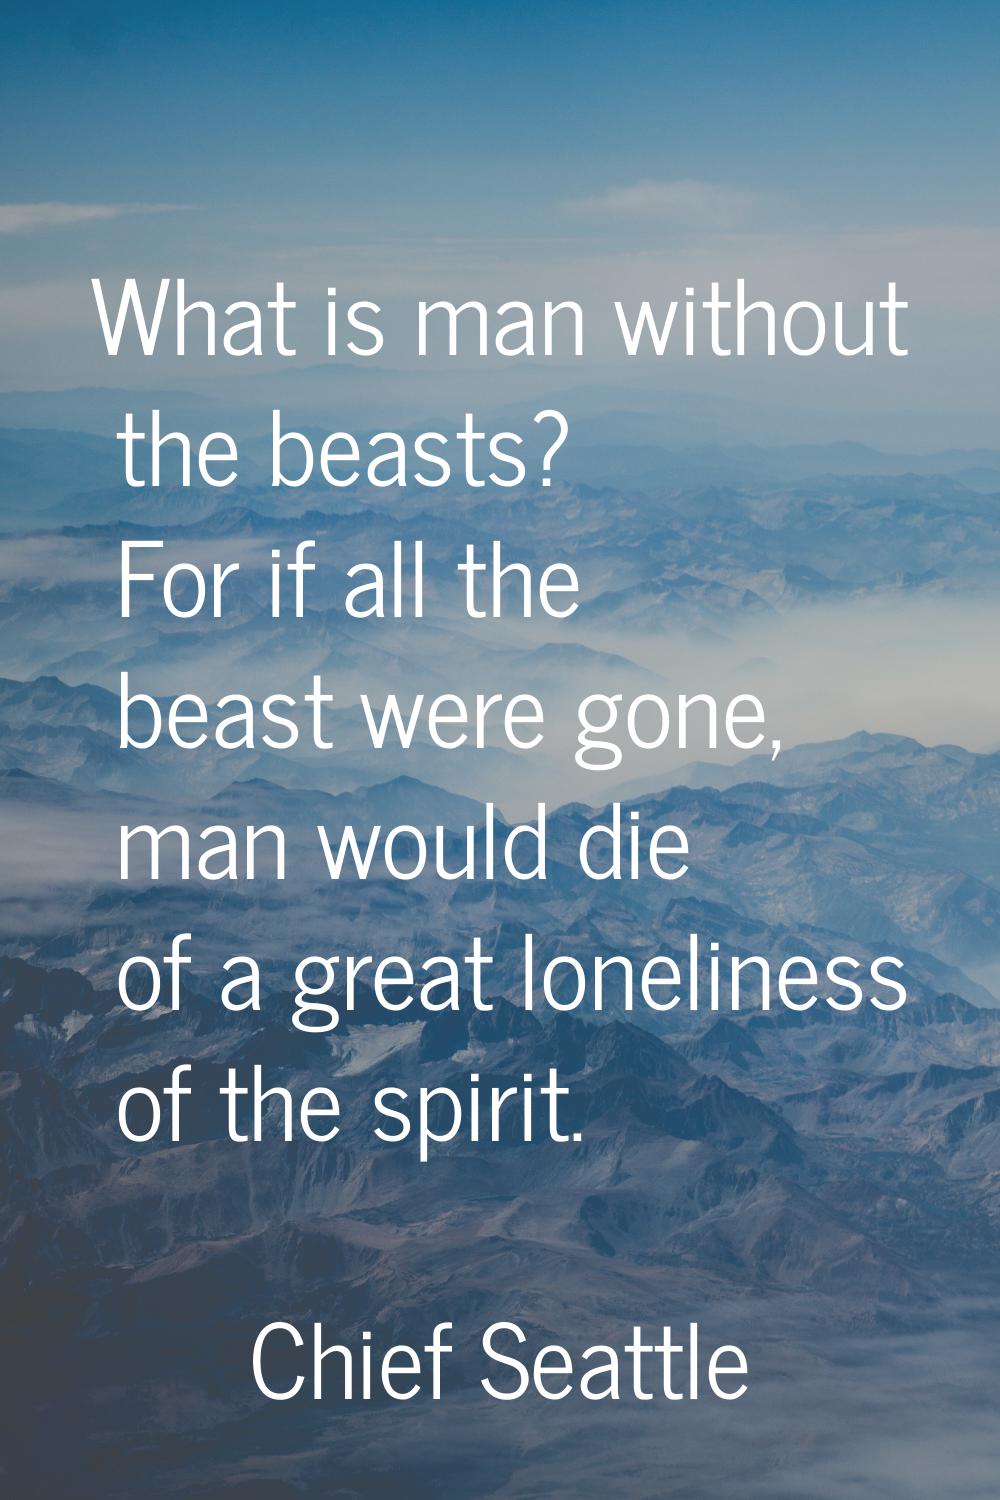 What is man without the beasts? For if all the beast were gone, man would die of a great loneliness